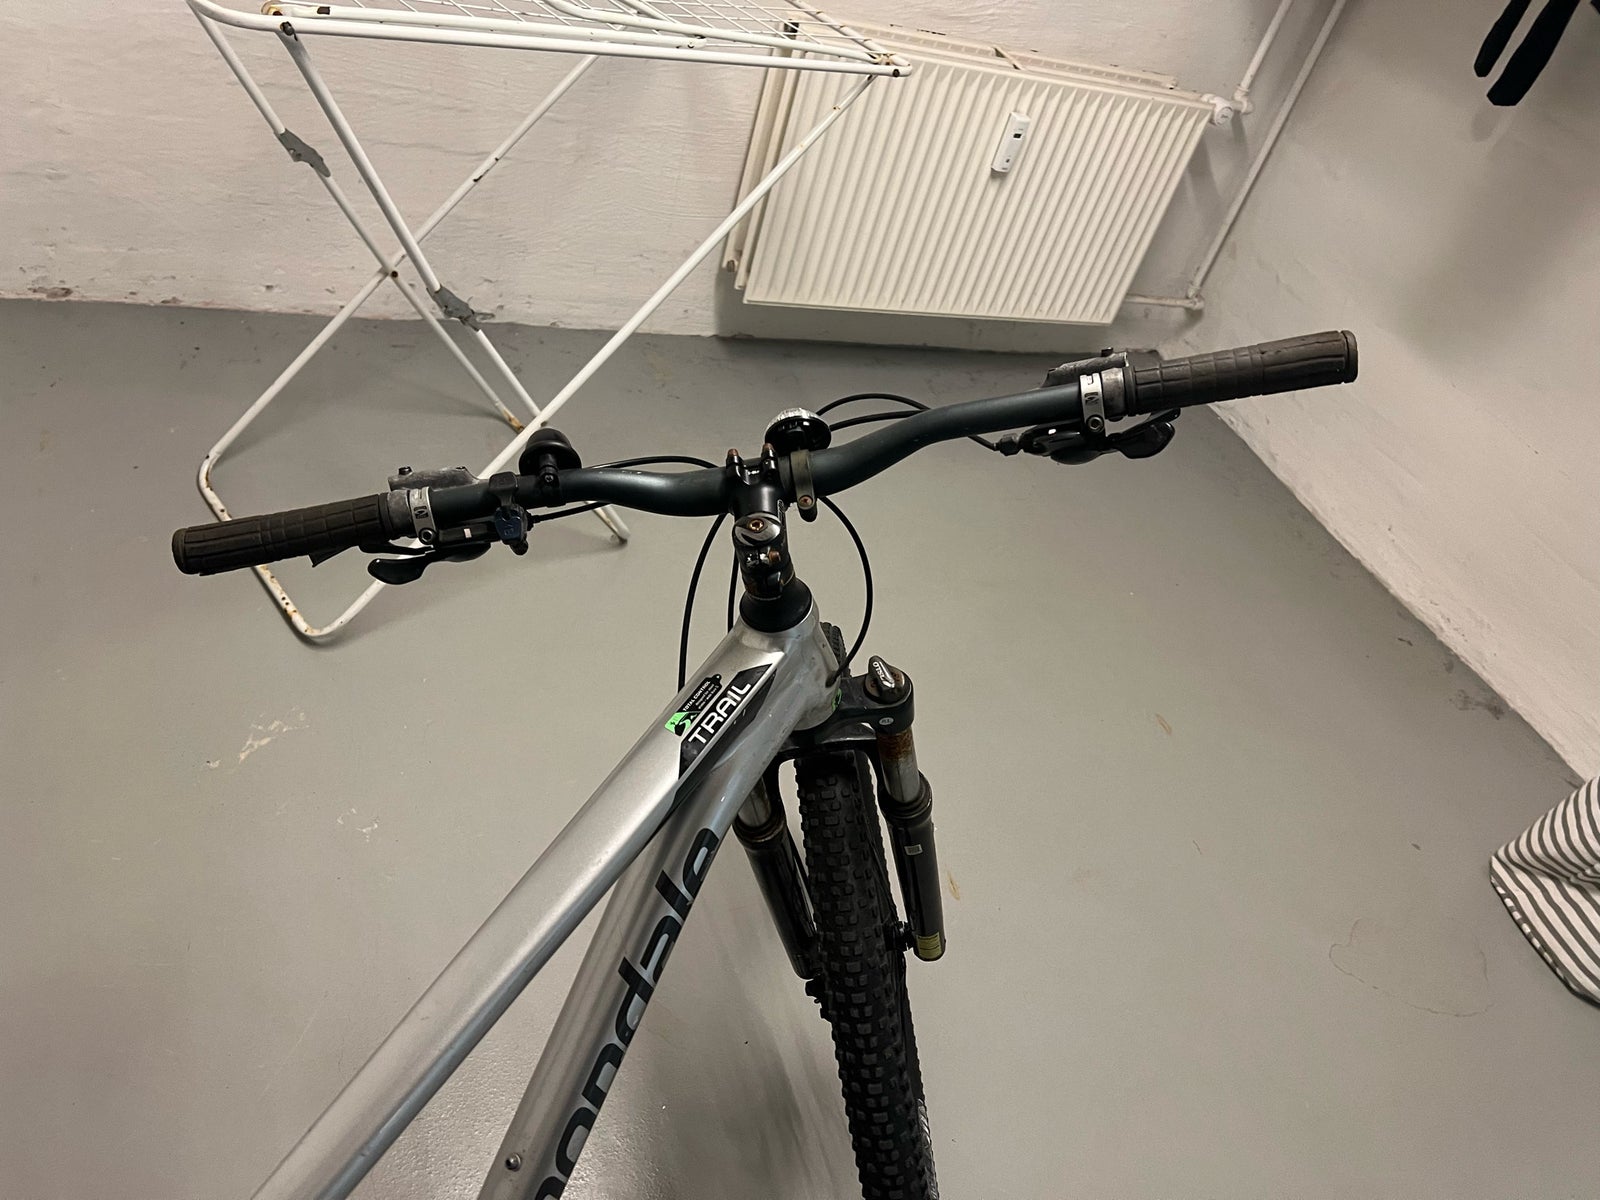 Cannondale, hardtail, 16,5 tommer